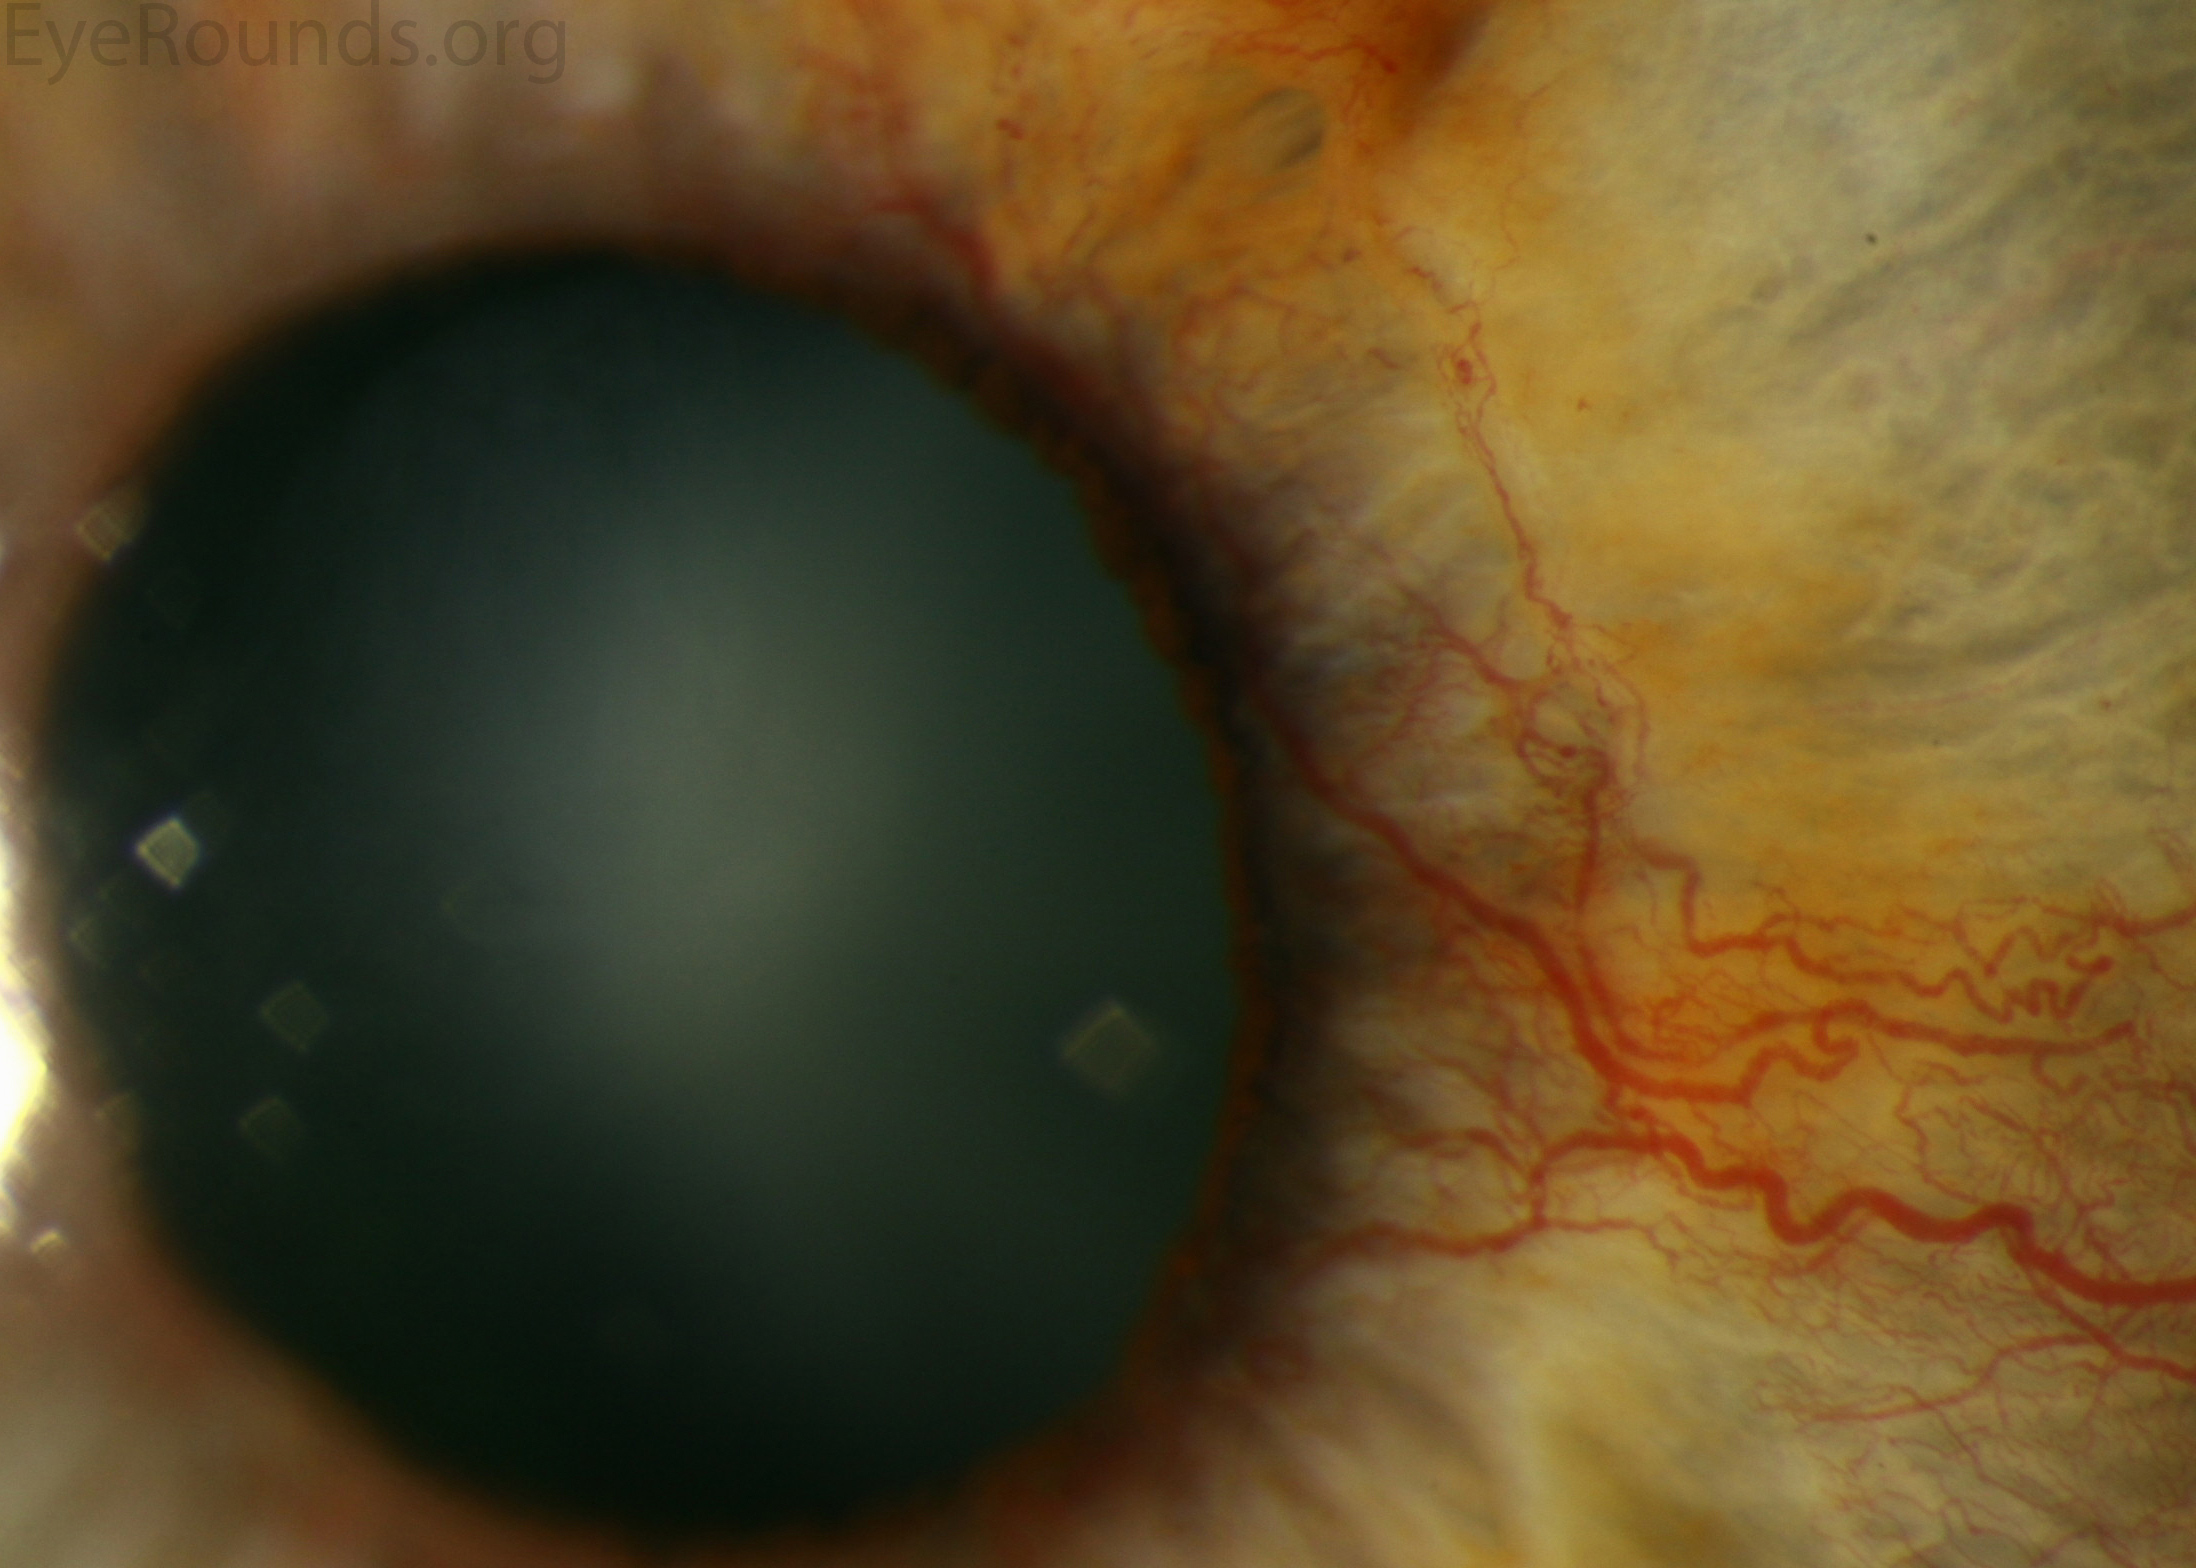 Neovascularization of the iris high magnification